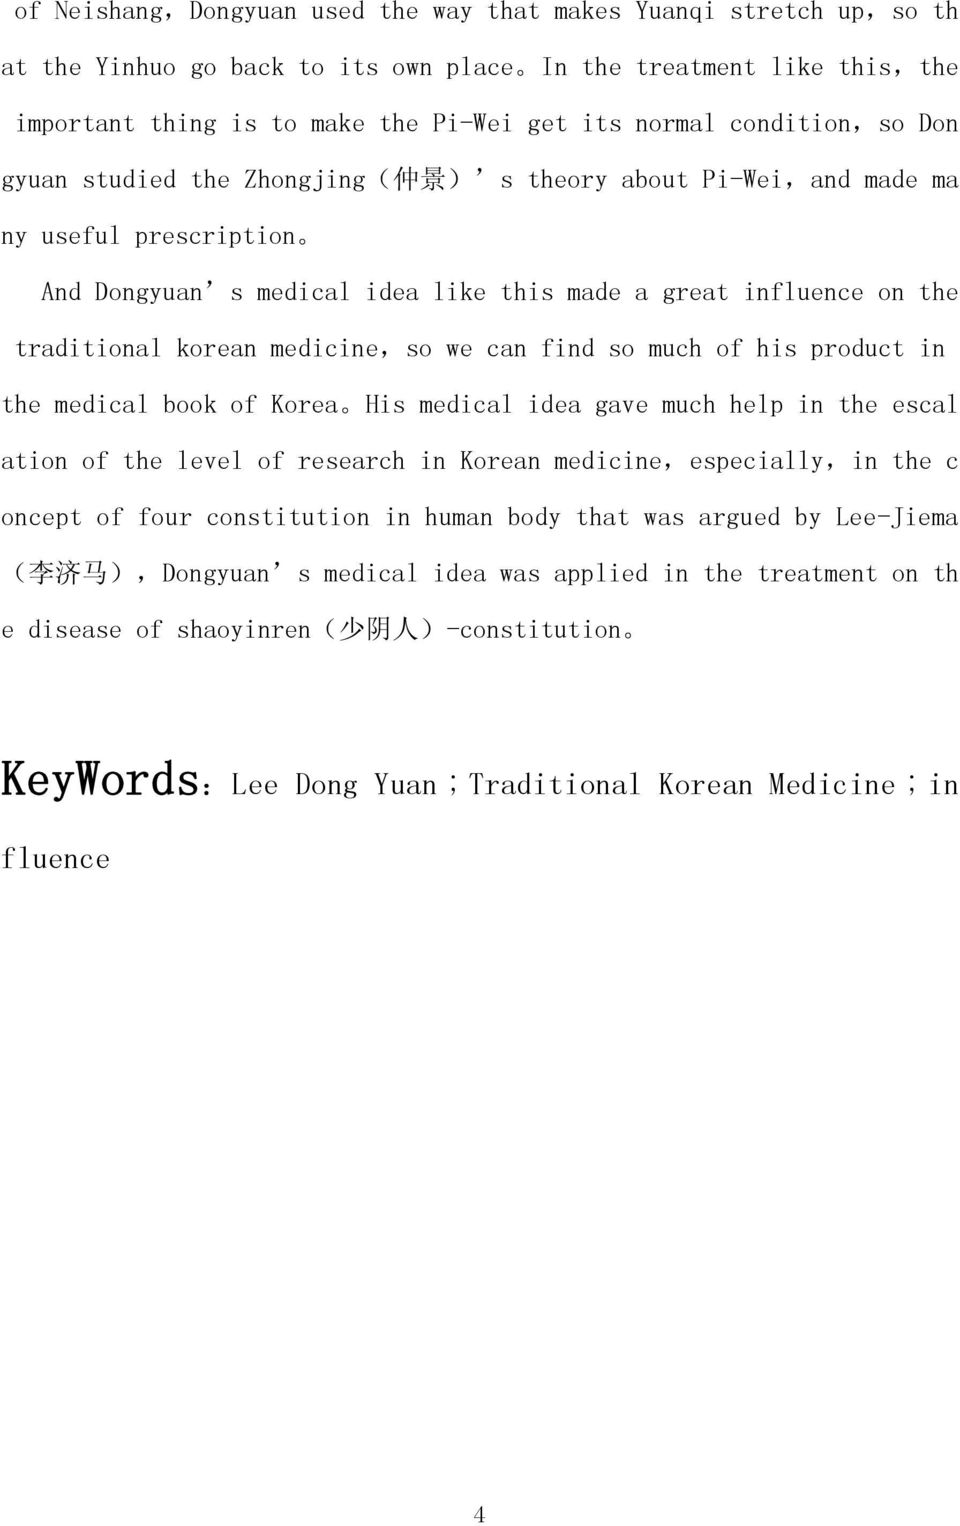 medicine,so we can find so much of his product in the medical book of Korea His medical idea gave much help in the escal ation of the level of research in Korean medicine,especially,in the c oncept